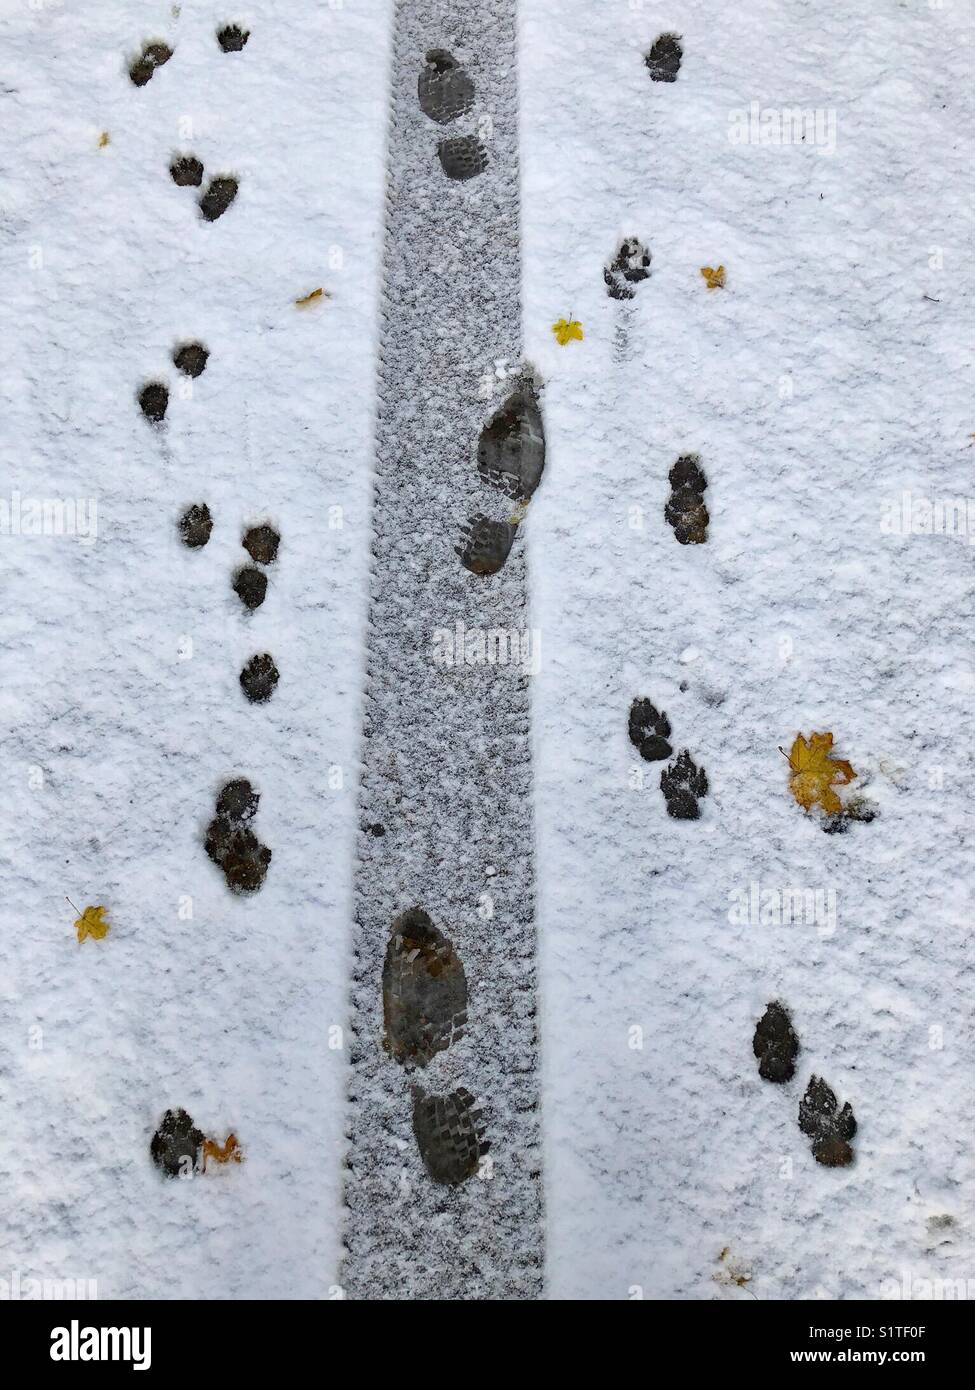 Prints in light snow - human, dog and tyre track Stock Photo